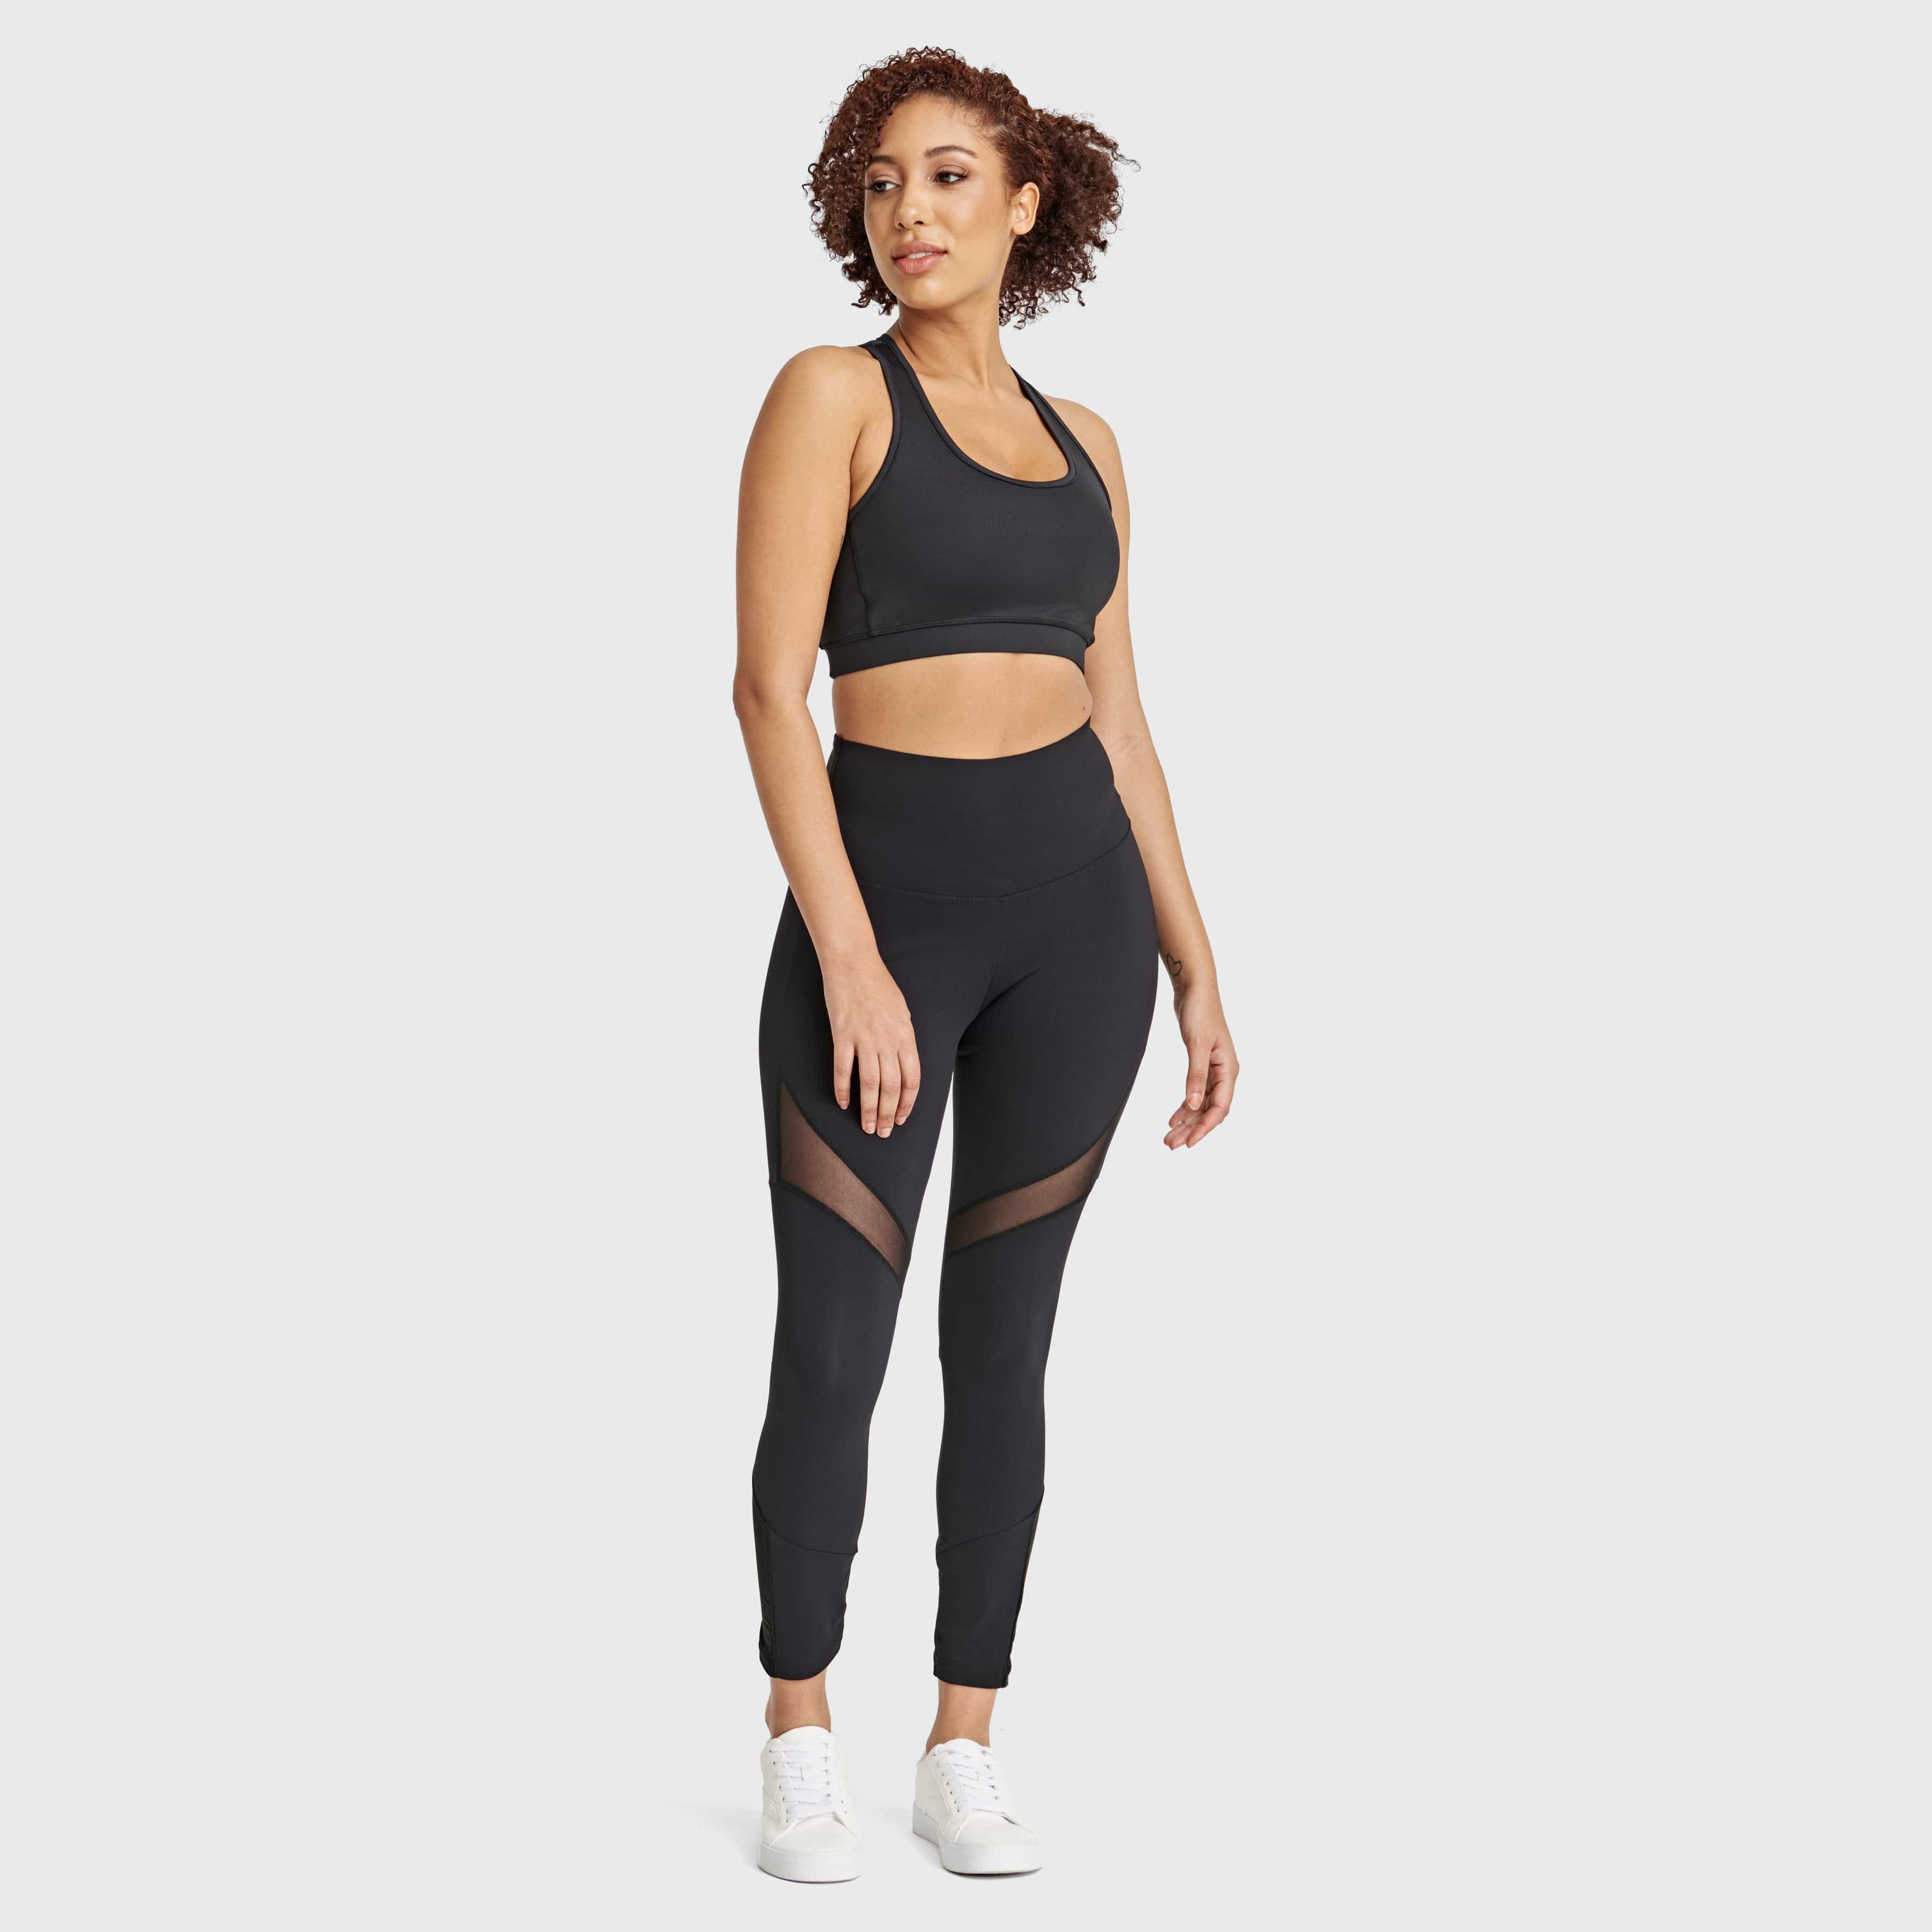 Superfit Diwo Pro With Mesh Detailing - High Waisted - 7/8 Length - Black 3